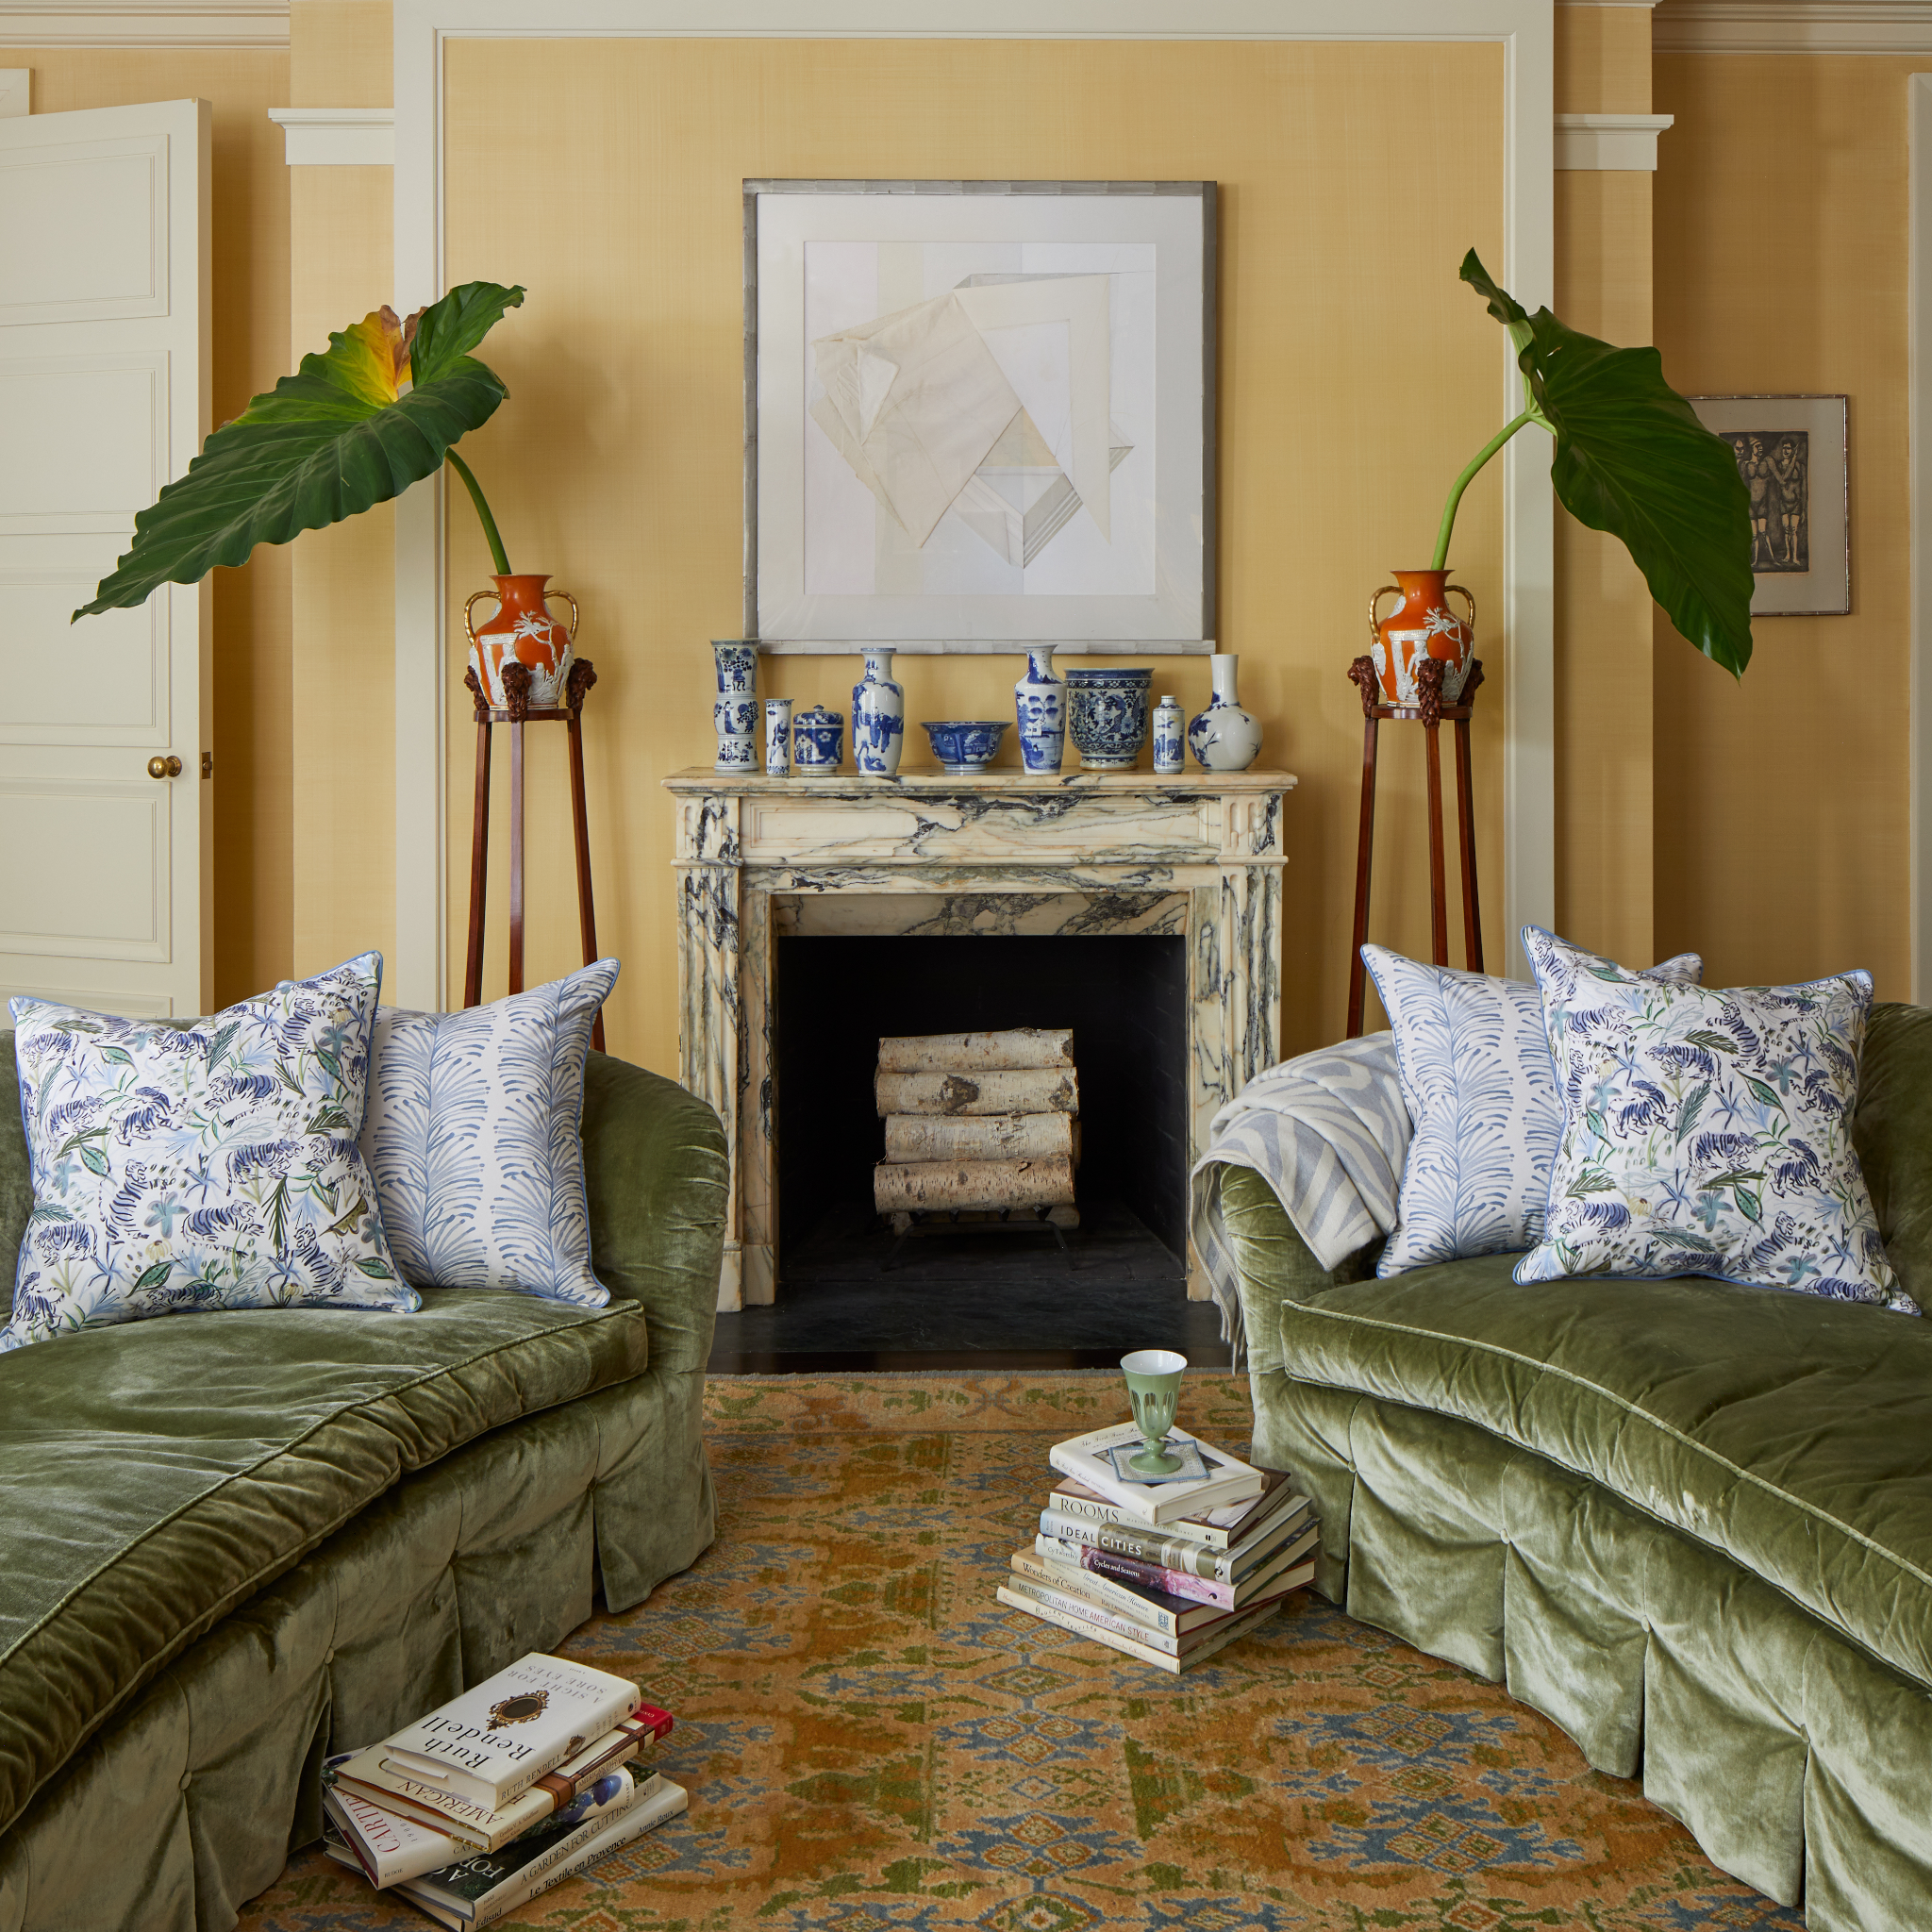 Living room styled with two fern green velvet couches on each side and a Blue With Intricate Tiger Design Printed Pillow and Sky Blue Botanical Stripe Printed Pillow on each couch surrounding two stacks of books on the floor